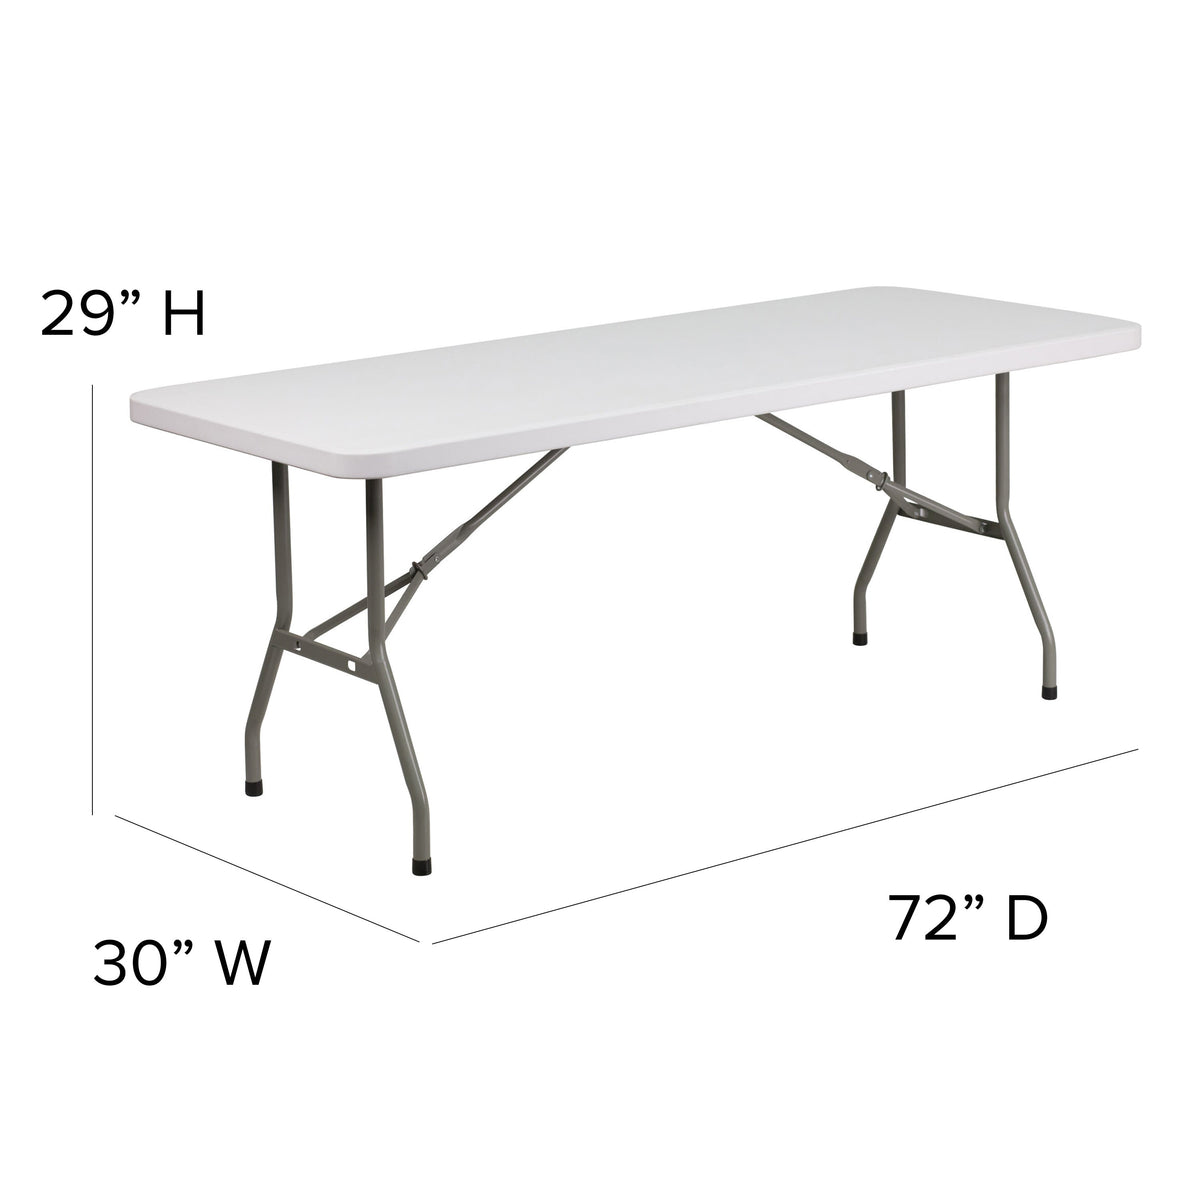 6-Foot Granite White Plastic Folding Table - Banquet / Event Folding Table